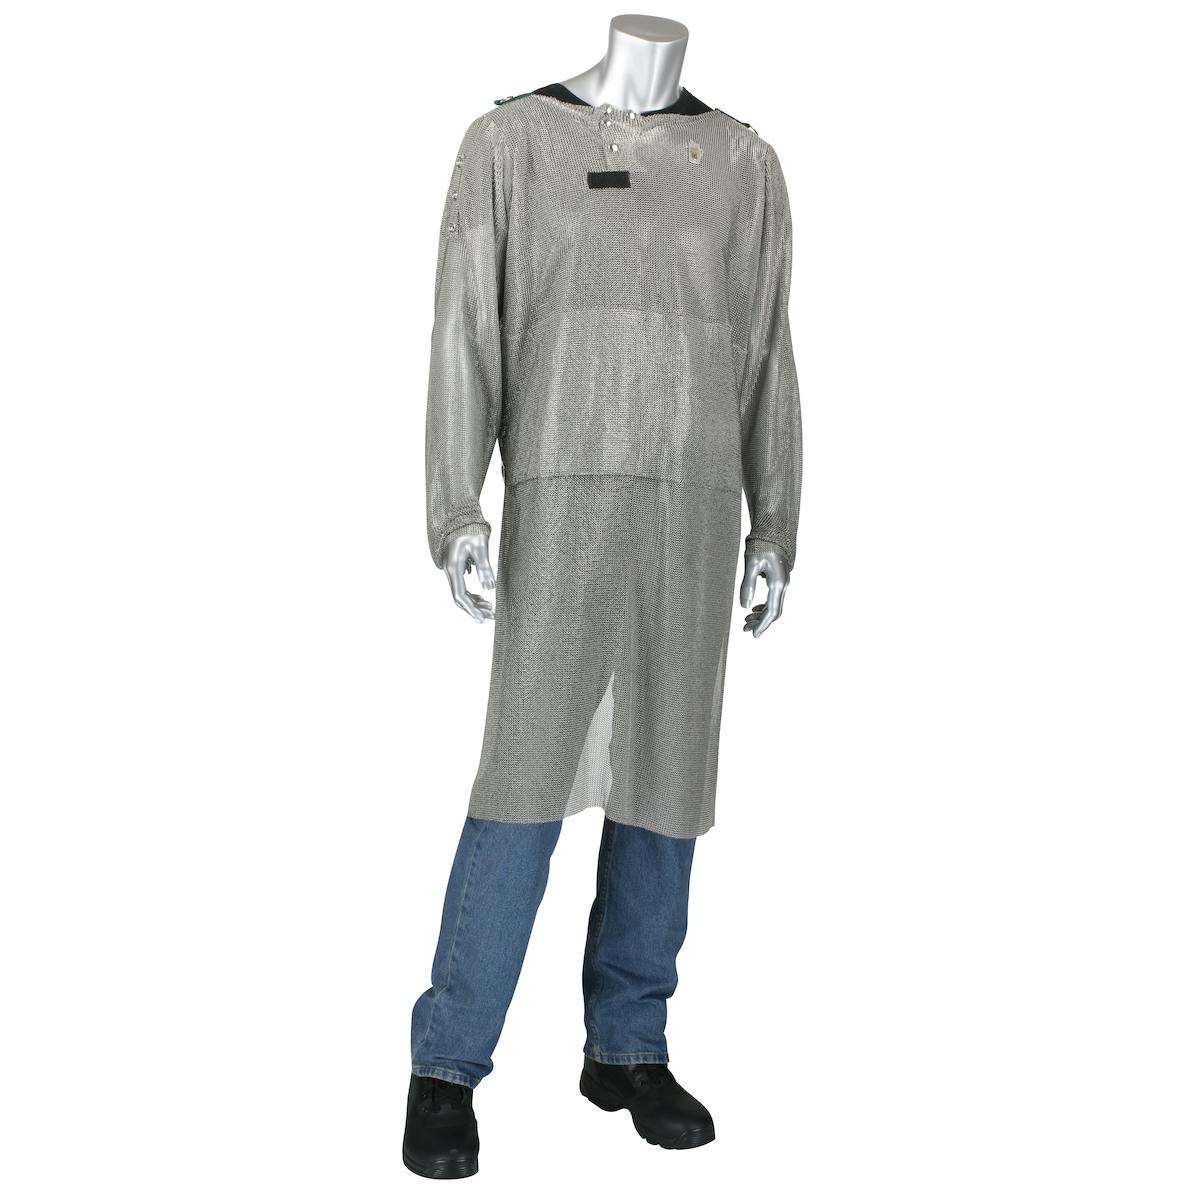 Stainless Steel Mesh Tunic with Extended Apron Front with Belly Guard, Silver (USM-4352L)_1